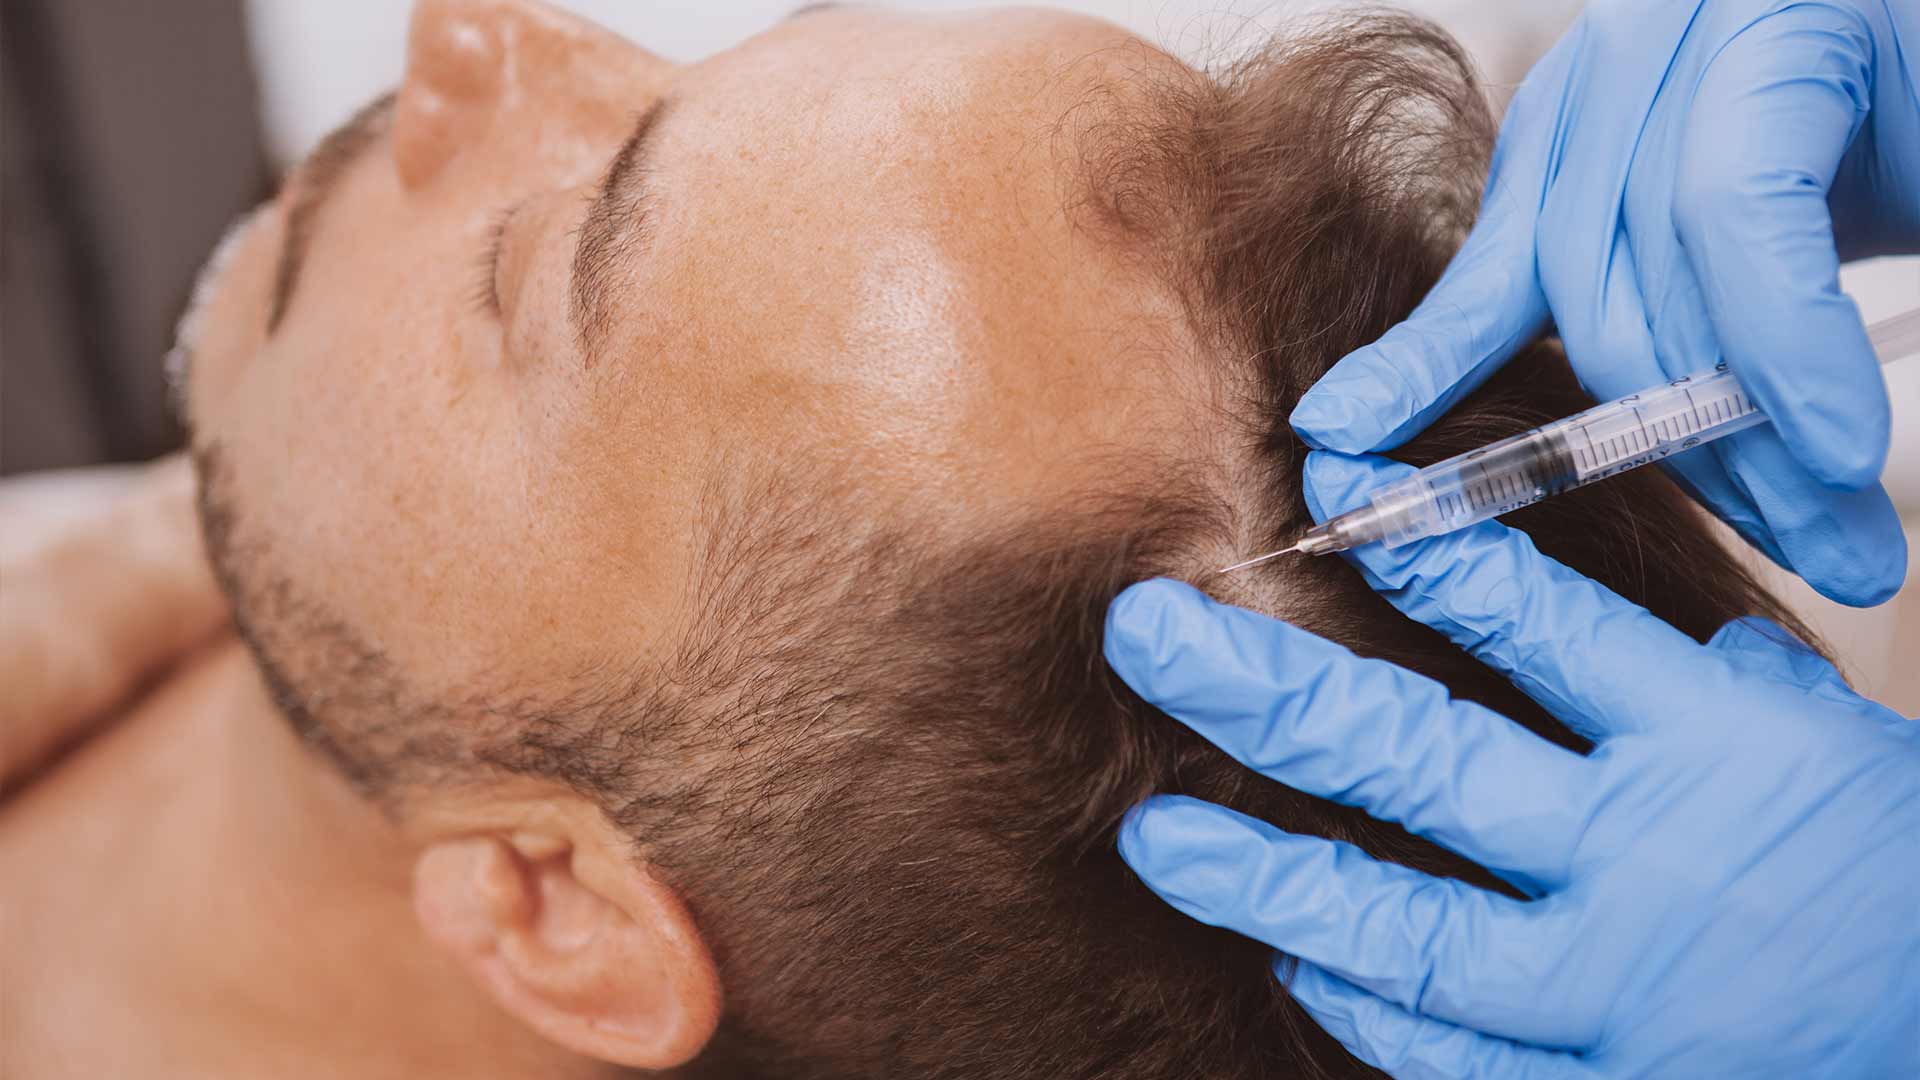 How Long Should You Stay In Turkey After Hair Transplant?